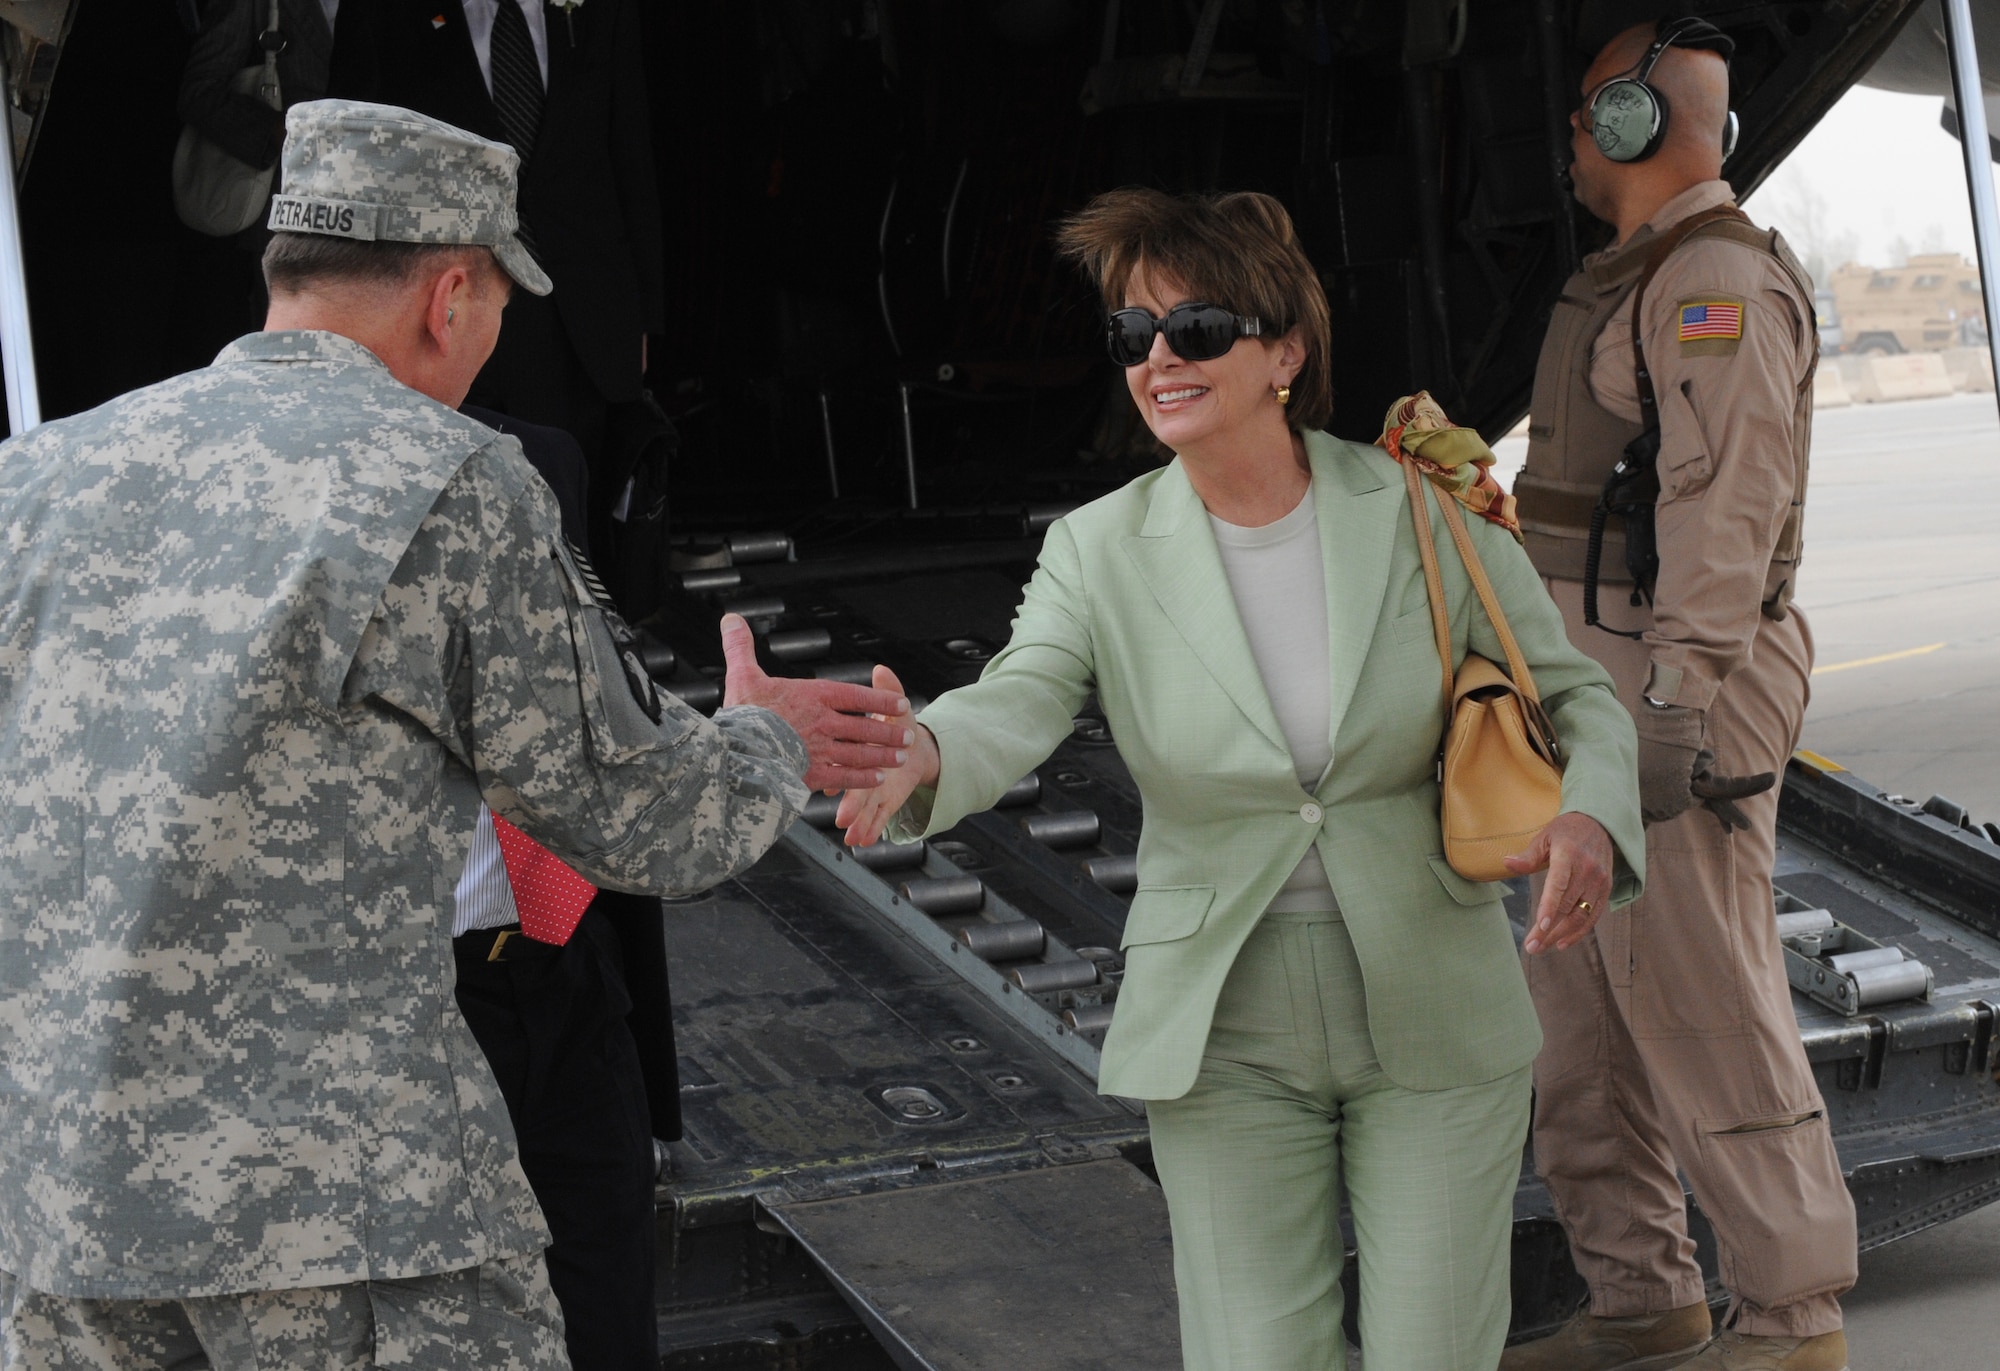 SATHER AIR BASE, Iraq -- Gen. David Patraeus, Multi-National Force - Iraq commanding general, greets Speaker of the House, Nancy Pelosi, as she and other U.S. representatives arrive here May 17 on a C-130 Hercules deployed from Dyess Air Force Base, Texas. (U.S. Air Force photo/Tech. Sgt. Amanda Callahan) 